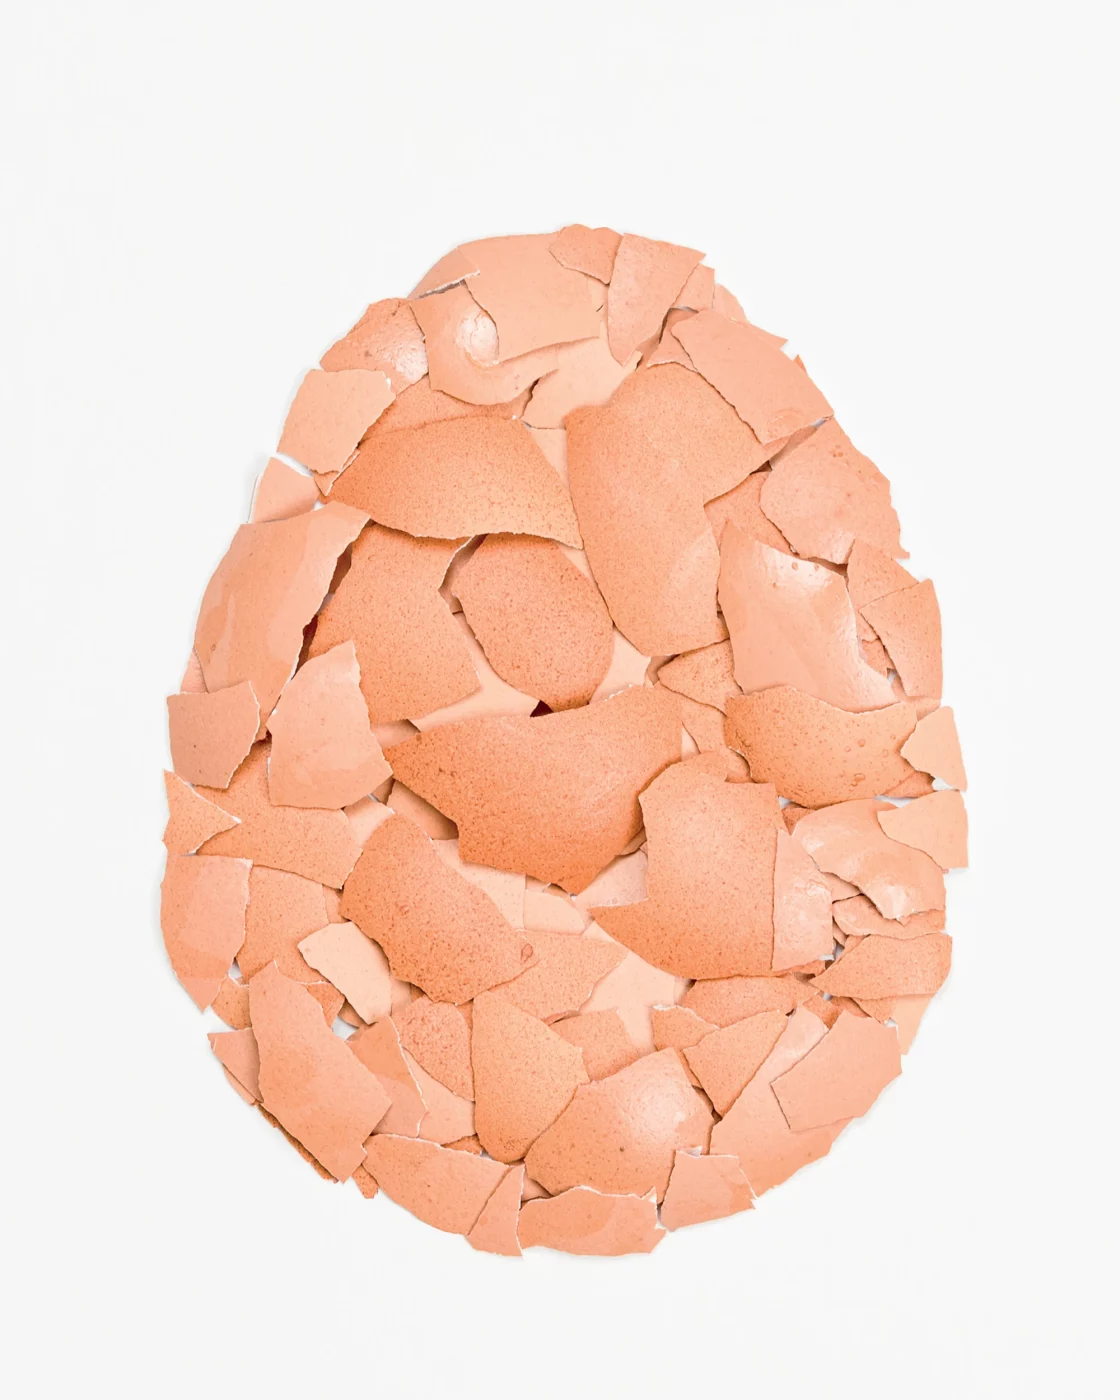 Amaral & Barthes. <i>For Vik Muniz</i>, from <i>If you please… Draw me an egg!</i> series, 2019. Courtesy of the artists.